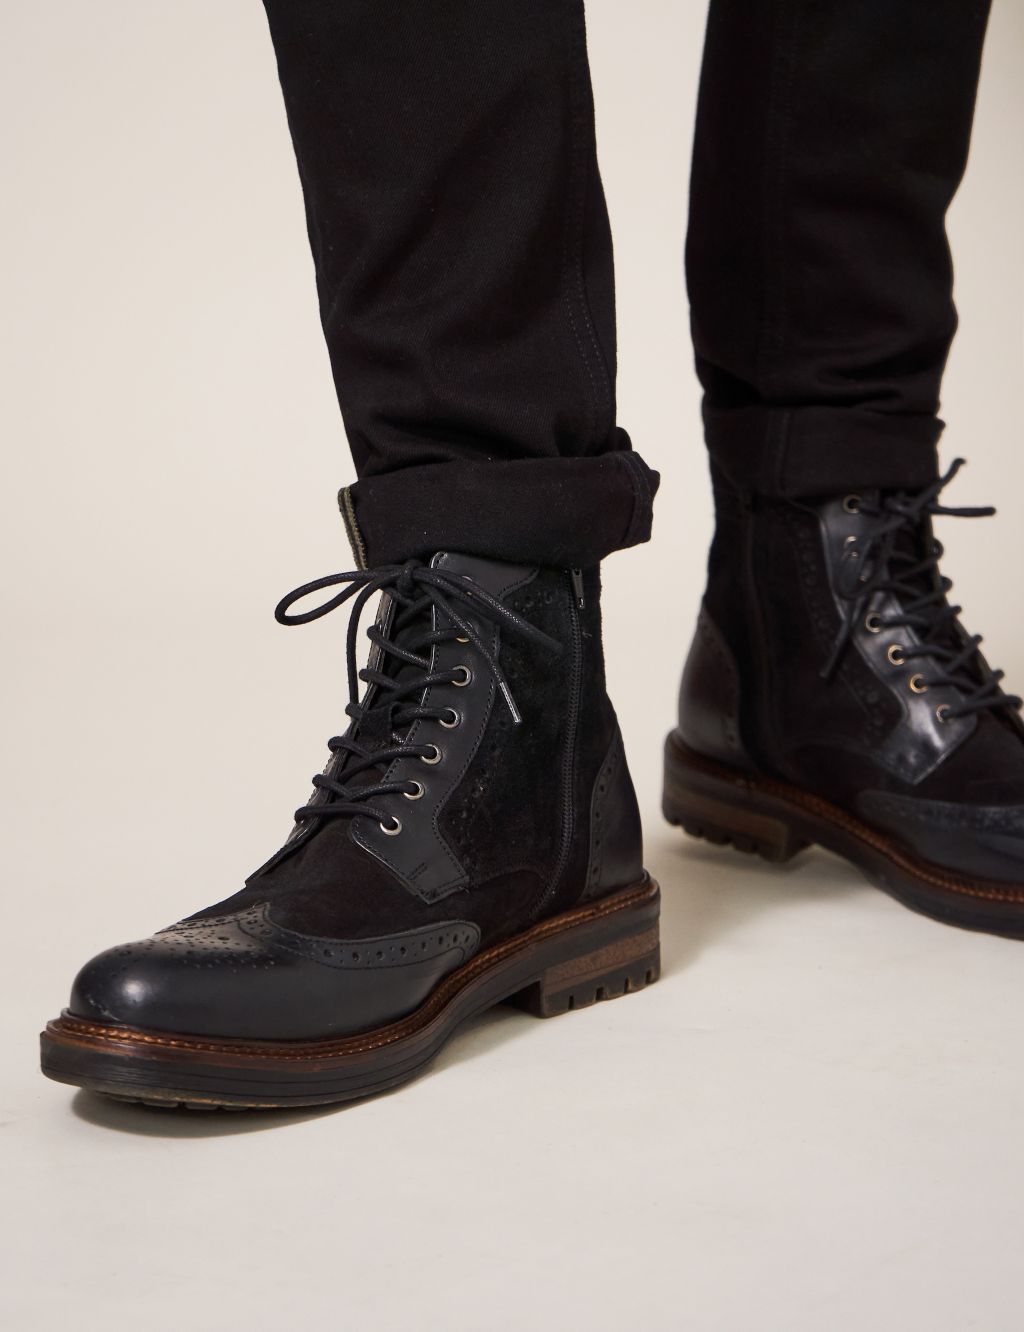 Leather Side Zip Brogue Boots